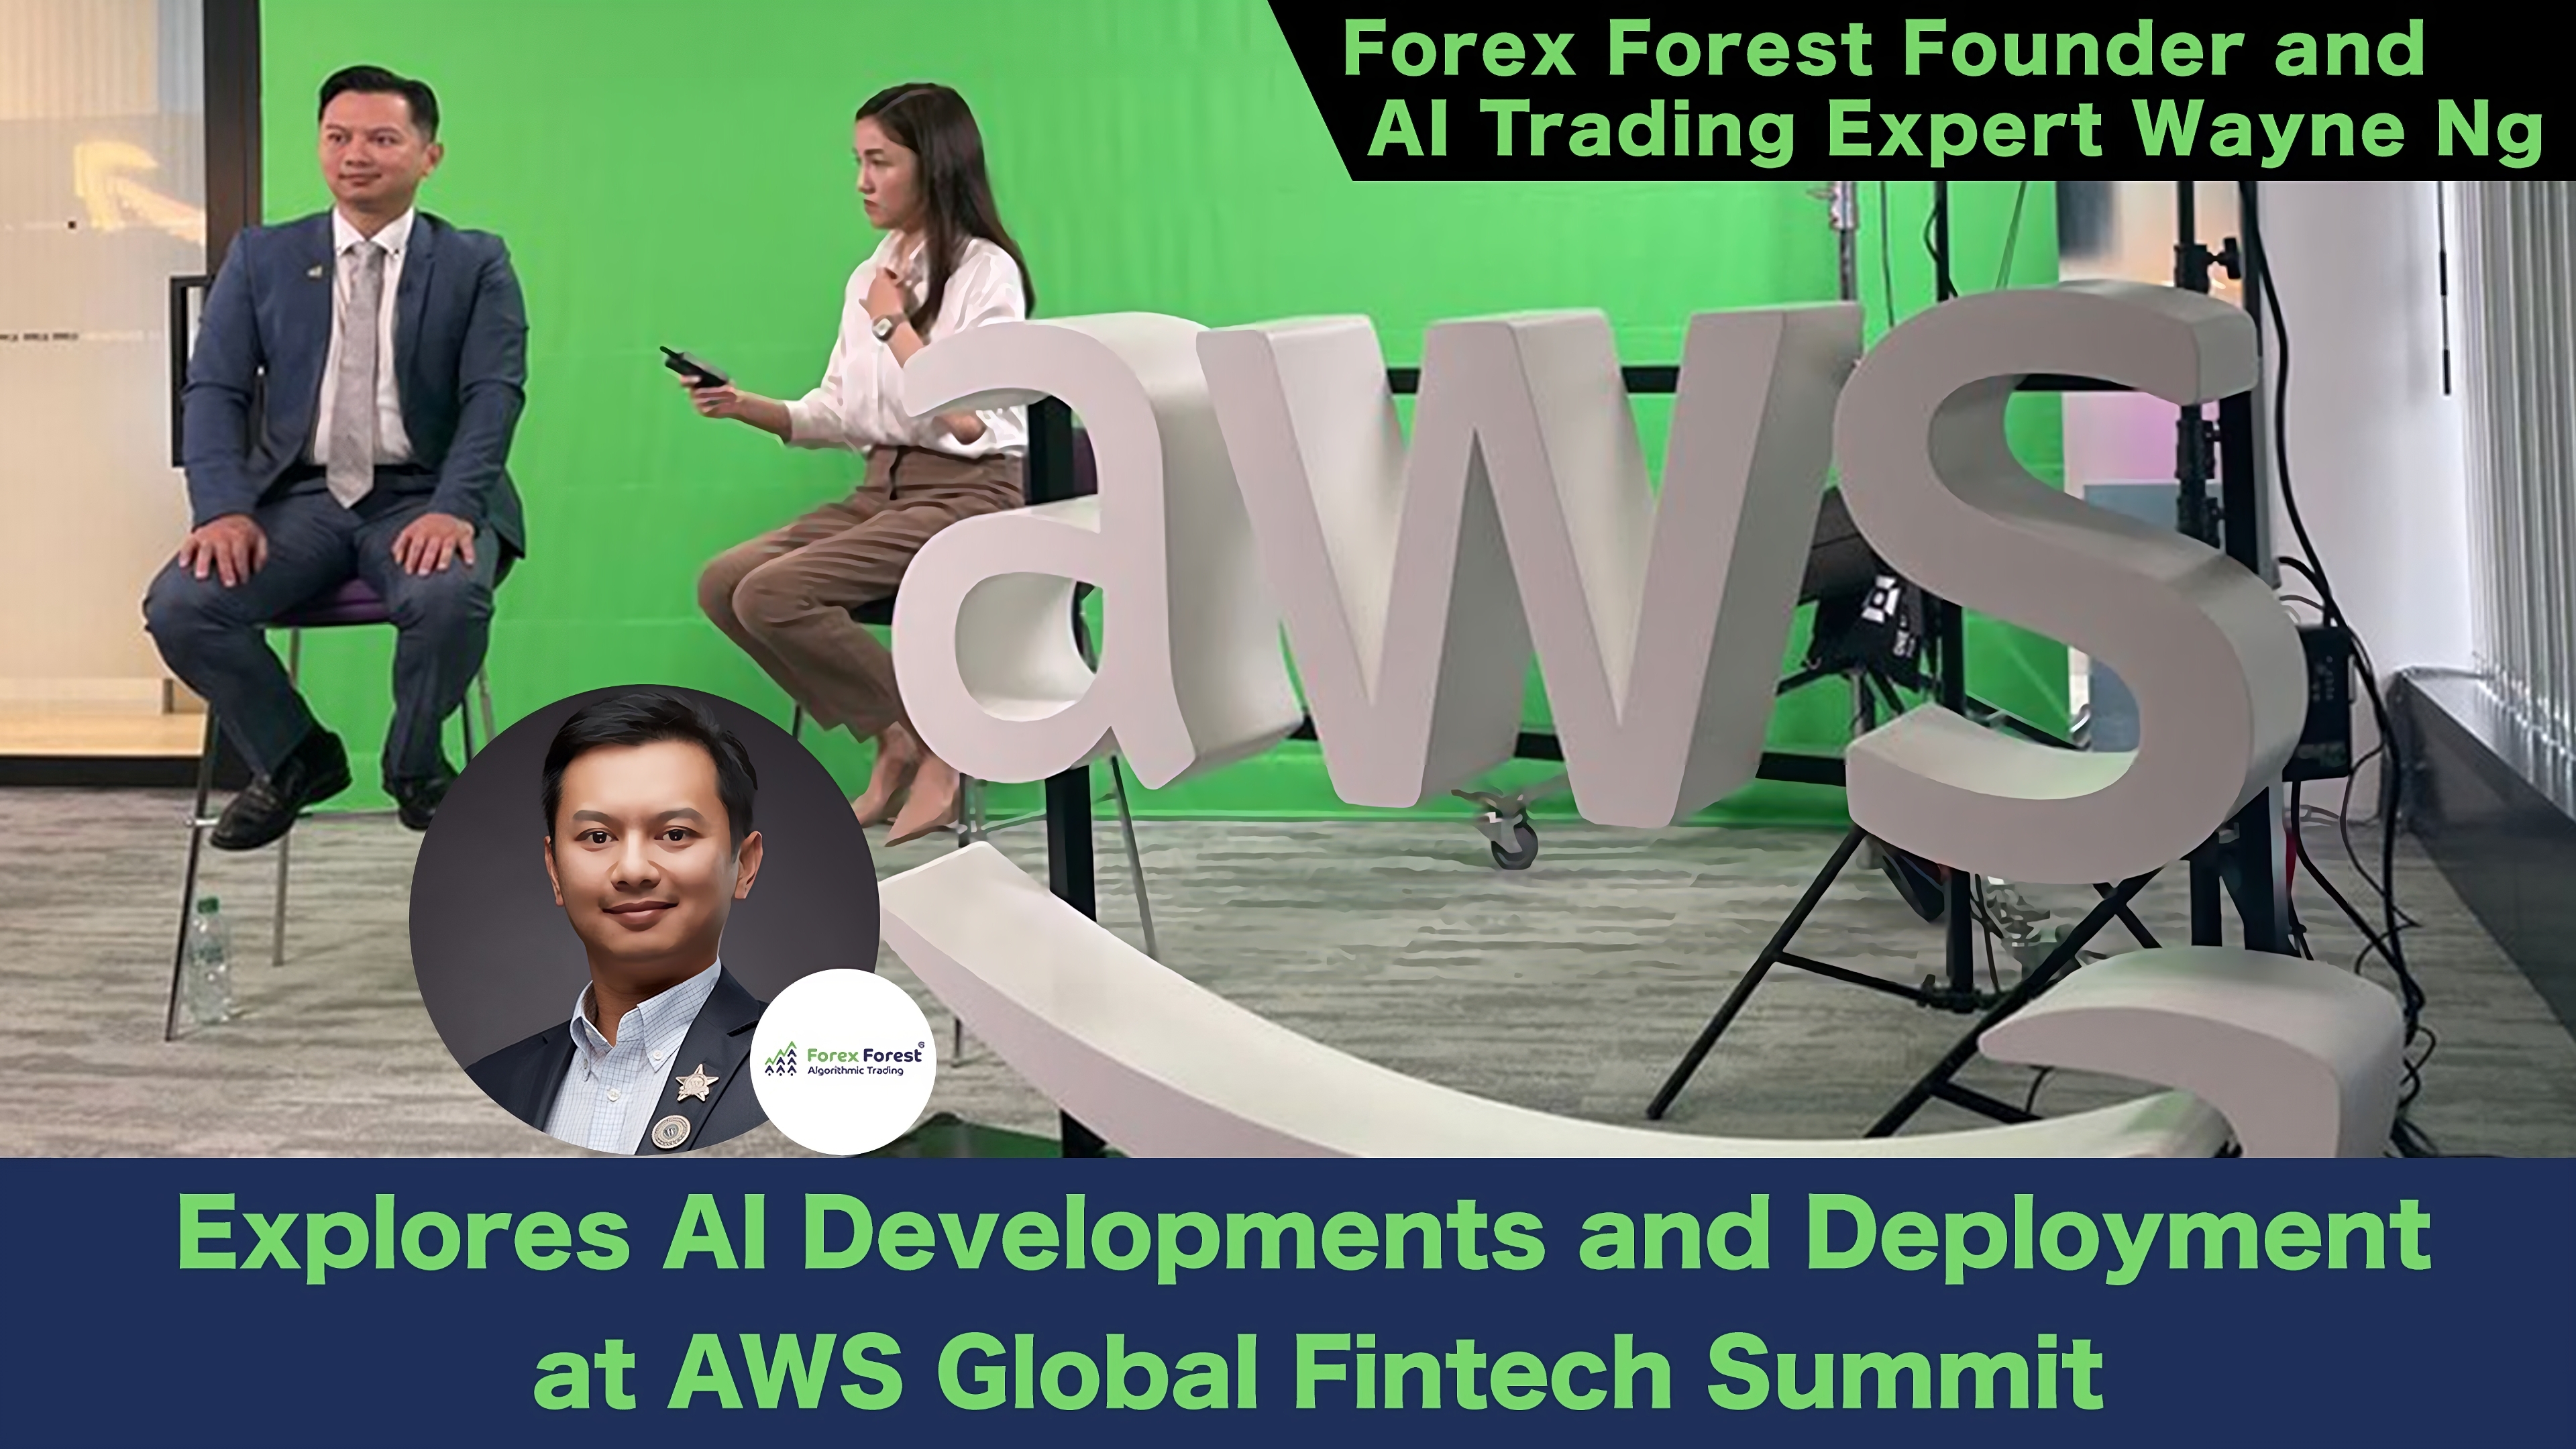 Forex Forest Founder and Al Trading Expert Wayne Ng Explores Al Developments and Deployment at AWS Global Fintech Summit